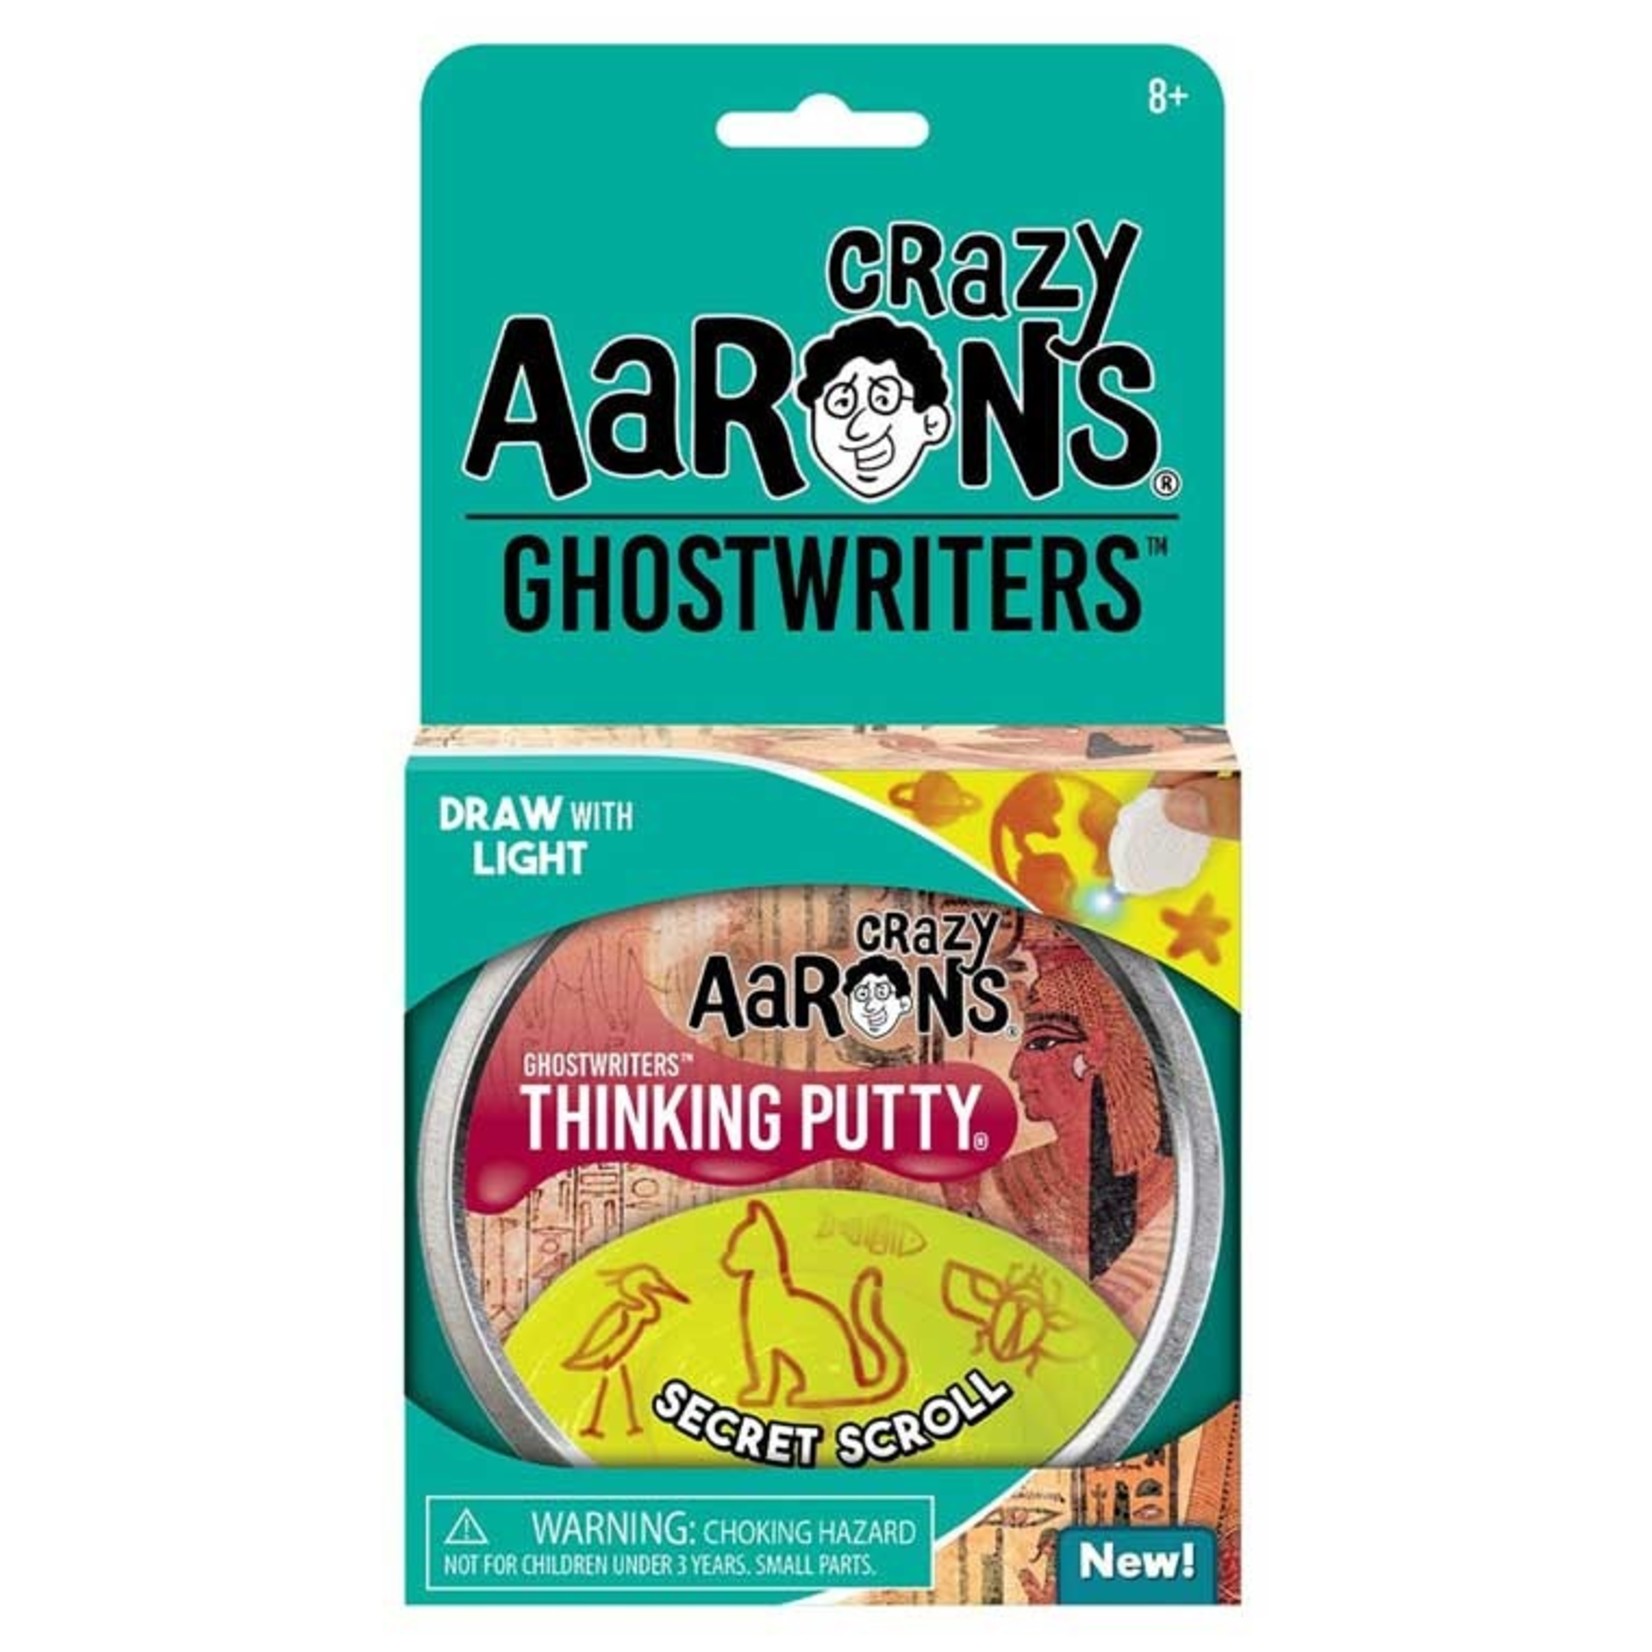 Crazy Aaron's Crazy Aaron's Ghostwriters Secret Scroll 4" Thinking Putty Tin